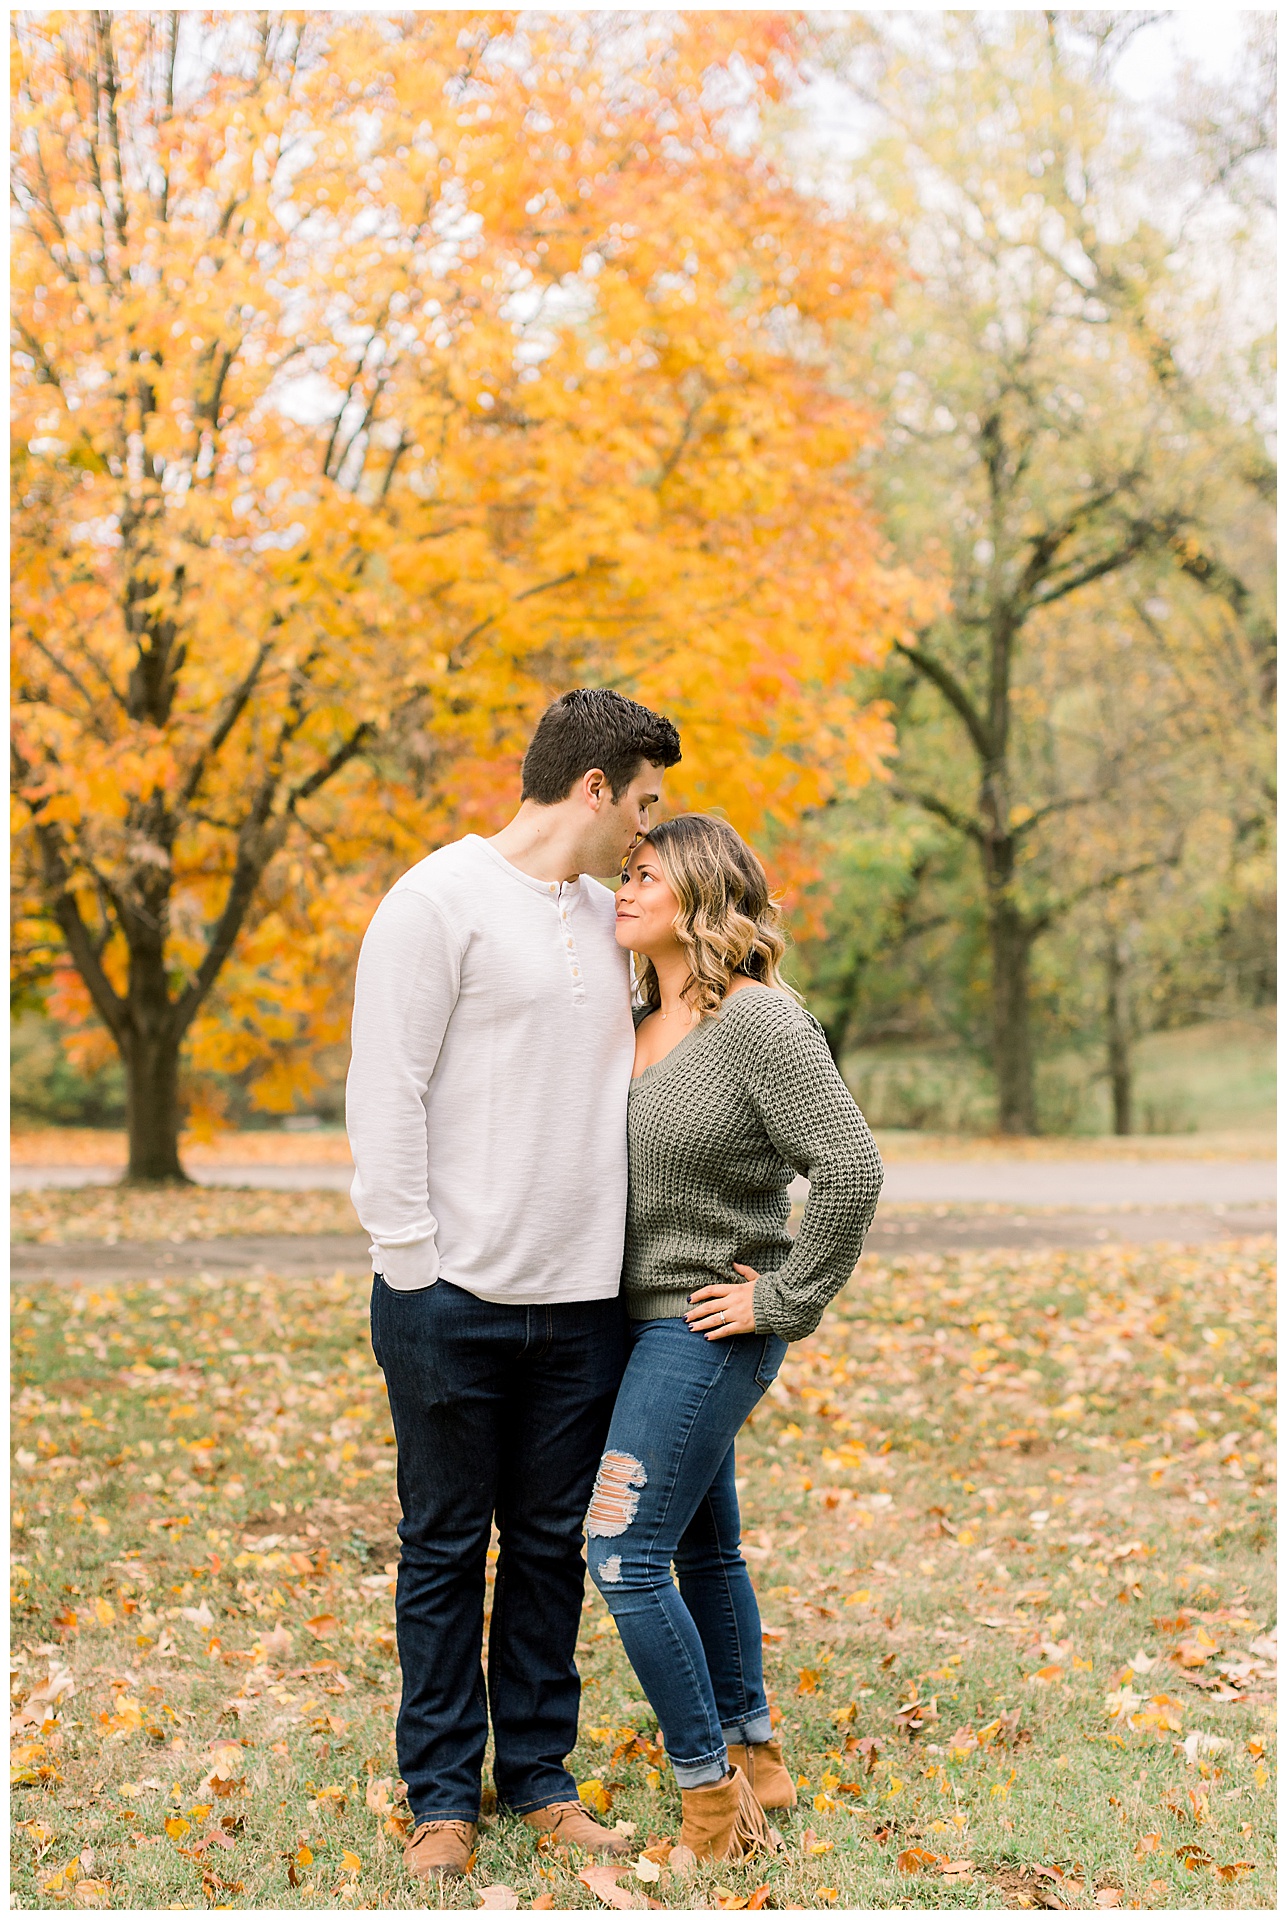 engagement photo session at a colorful park in fall 